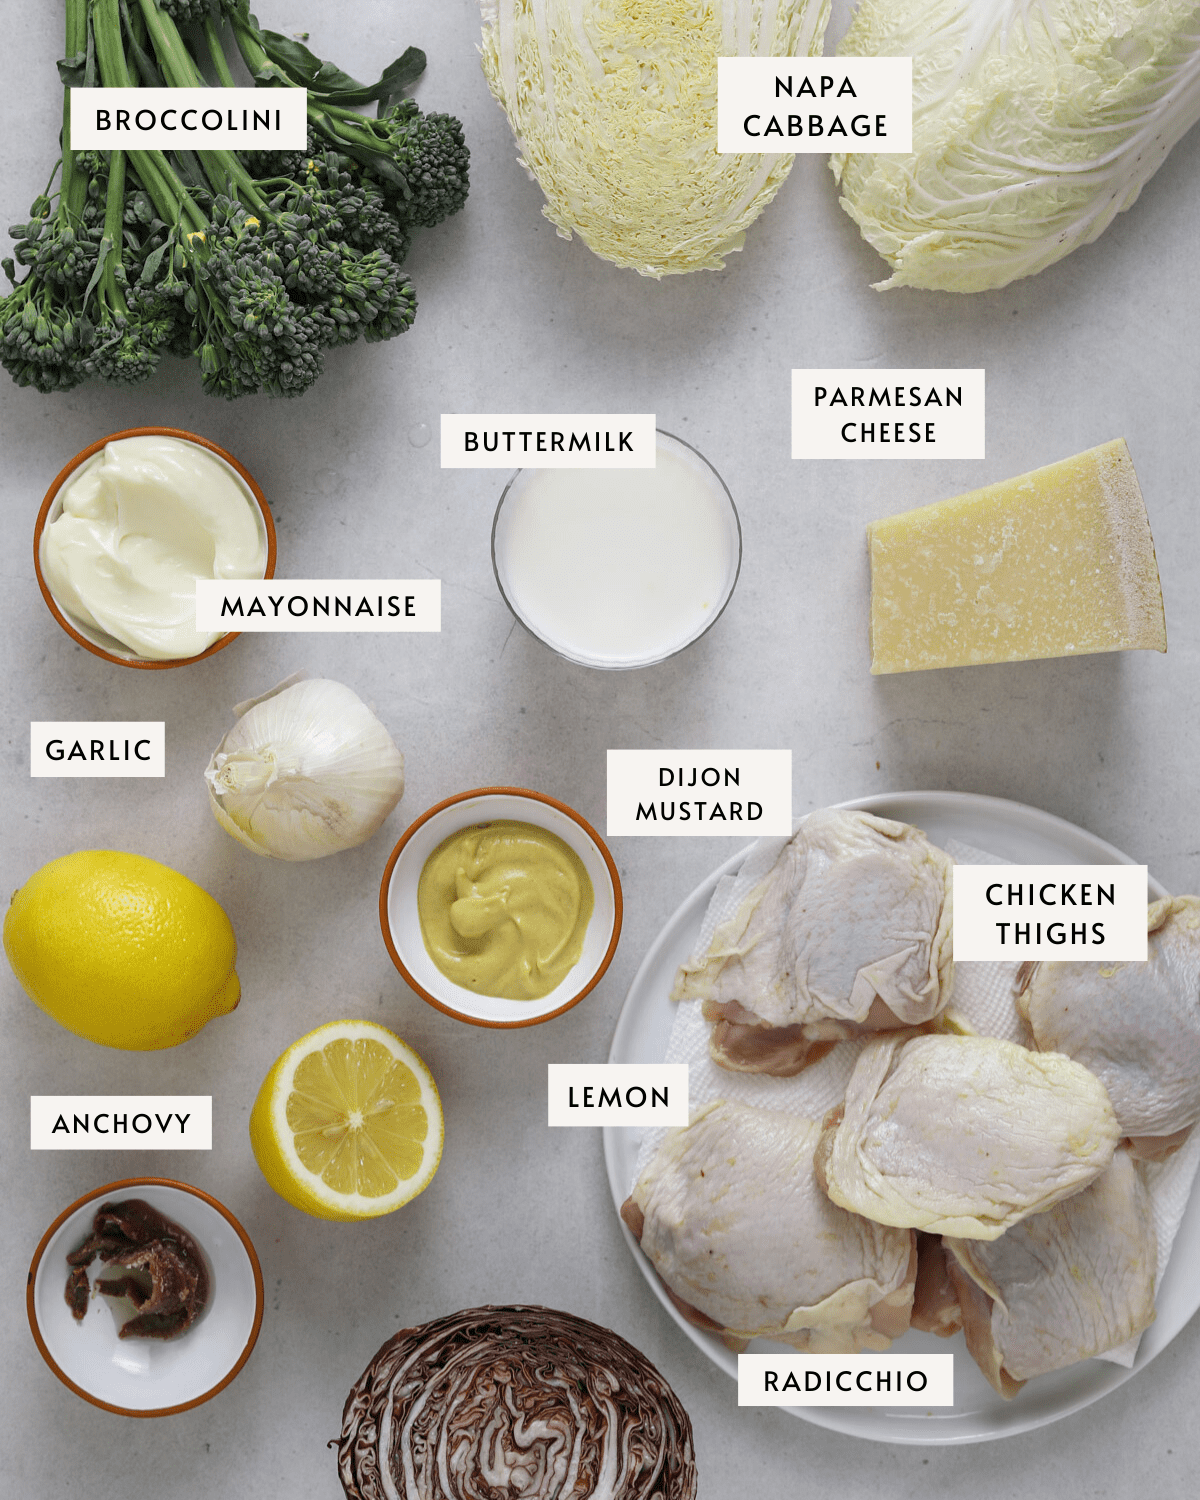 a bunch of broccolini, two halves of a head of napa cabbage, a bowl of dijon mustard, two lemons, chicken thighs of a white plate, radicchio, a bowl of buttermilk, a wedge of parmesan cheese.